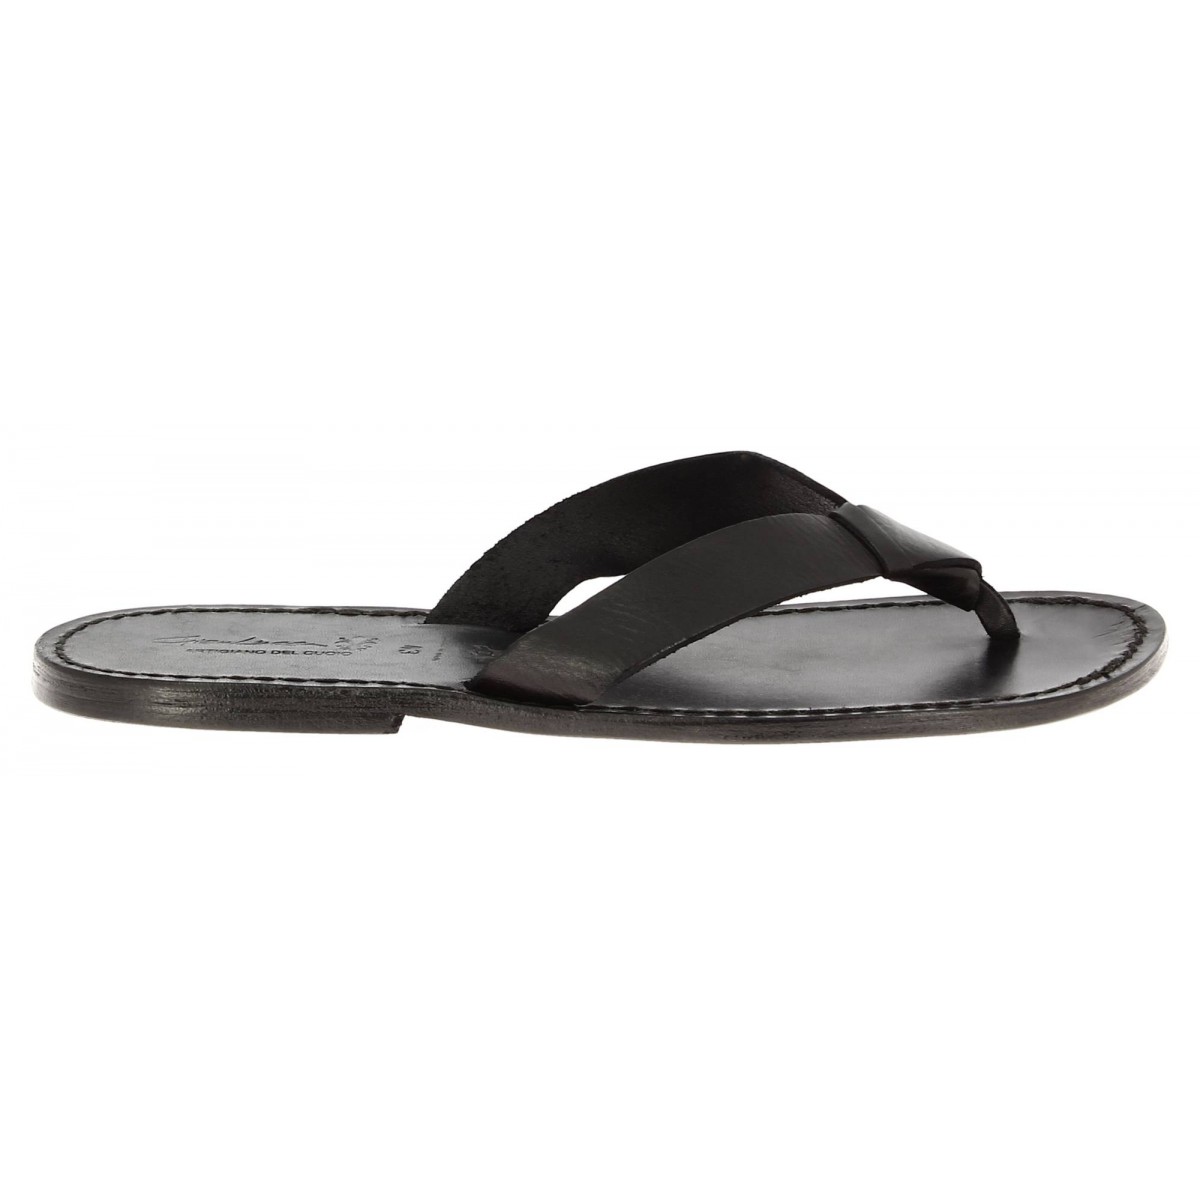 Handmade black leather thongs for men with leather sole | The leather ...